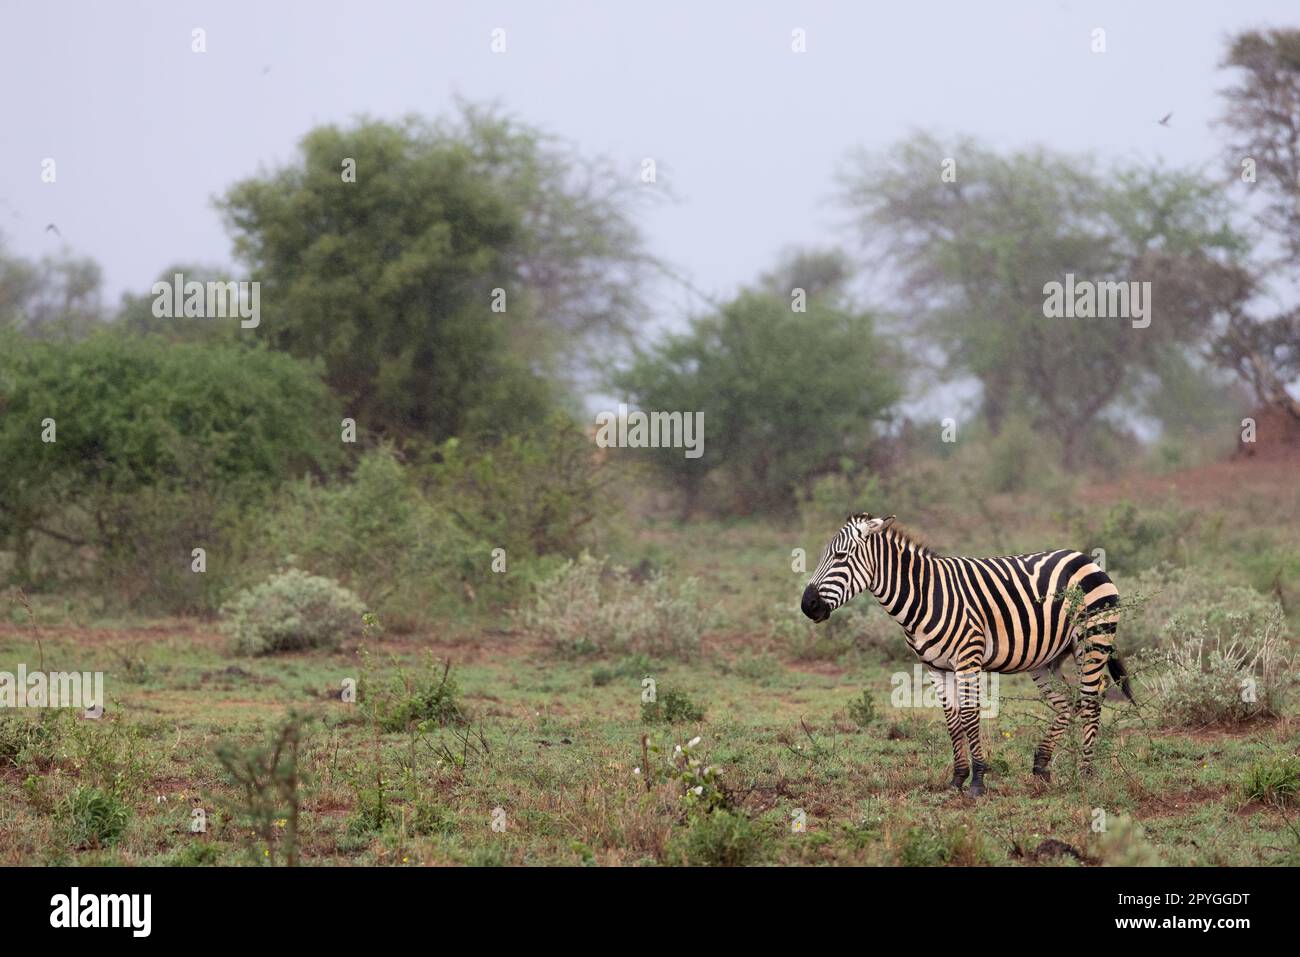 This captivating photo showcases the zebra, standing tall and proud on the vast and open savannah of the Kenyan Tsavo East reserve. The zebra's unique Stock Photo